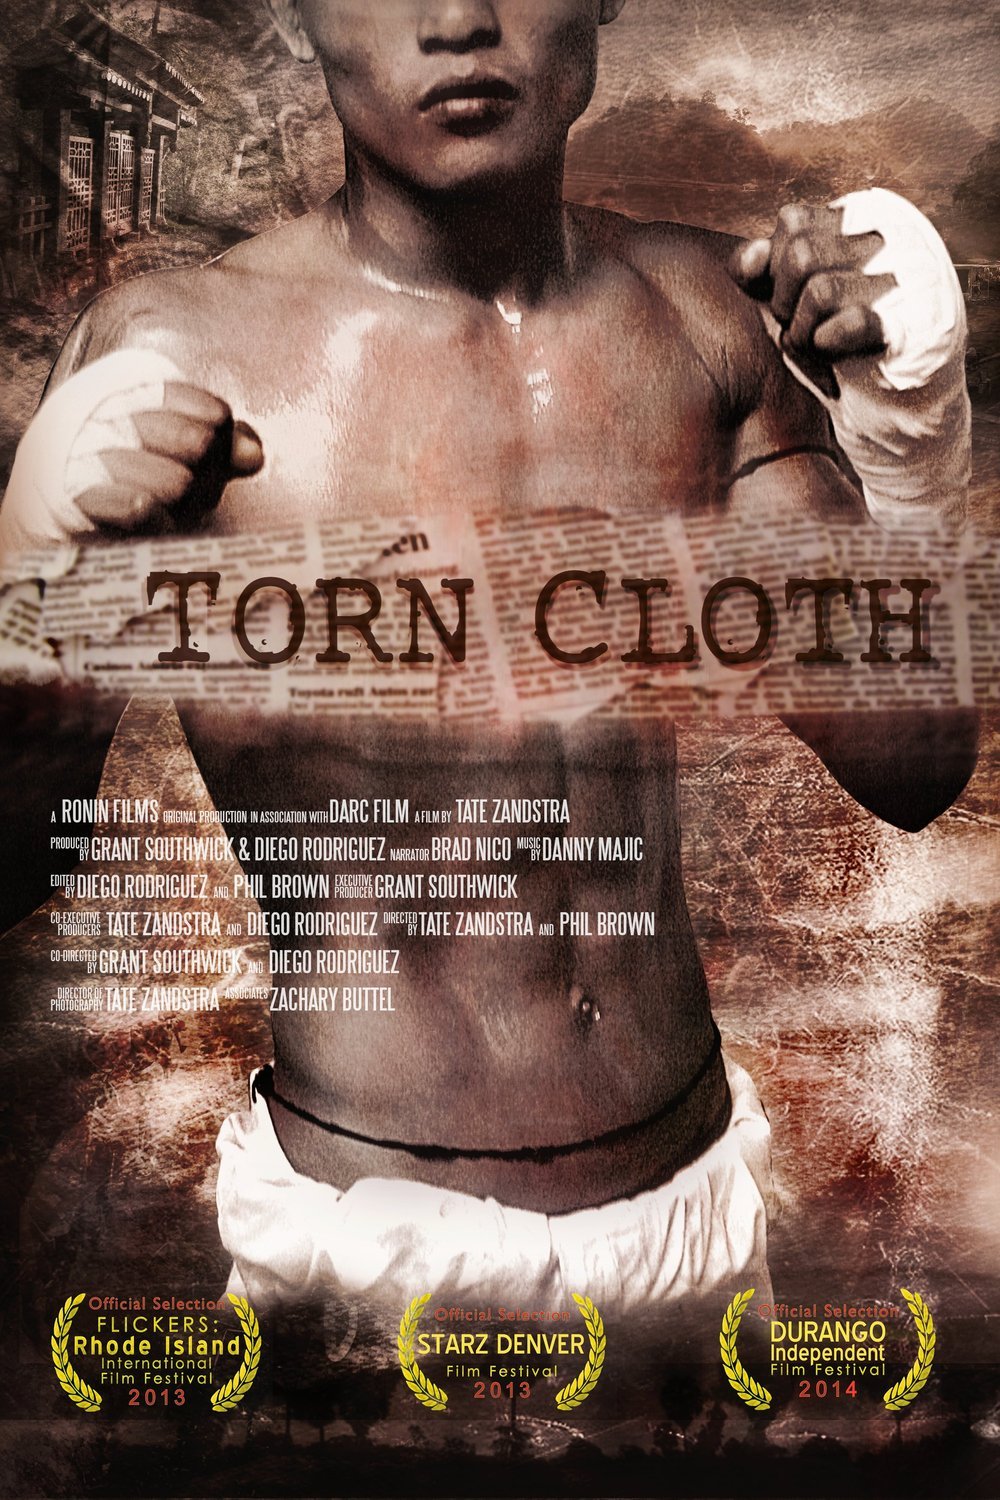 Thai poster of the movie Torn Cloth